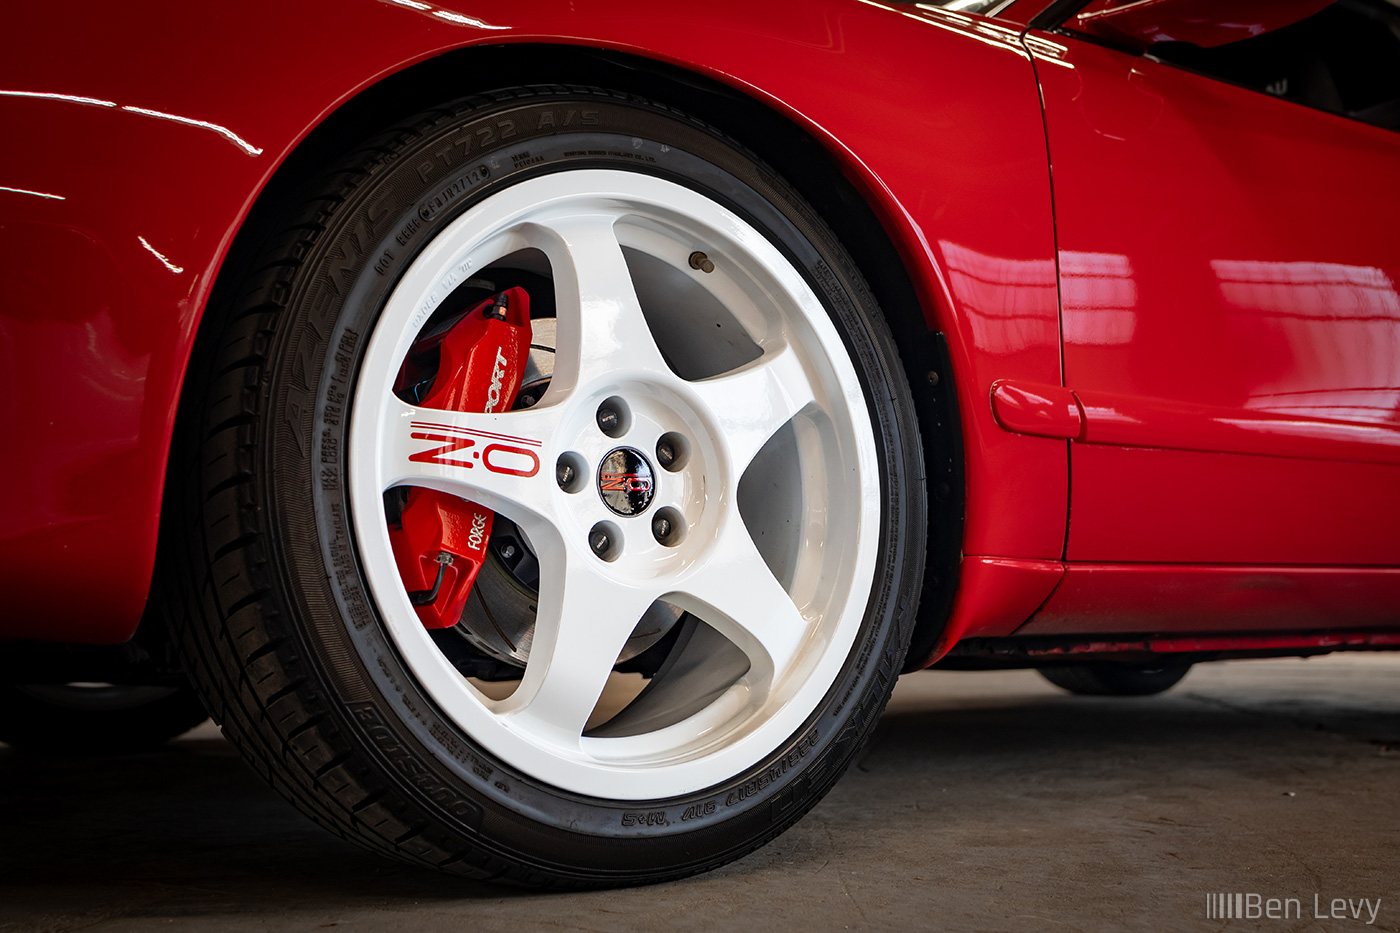 White OZ Racing Wheels on Red Toyota Celica All-Trac